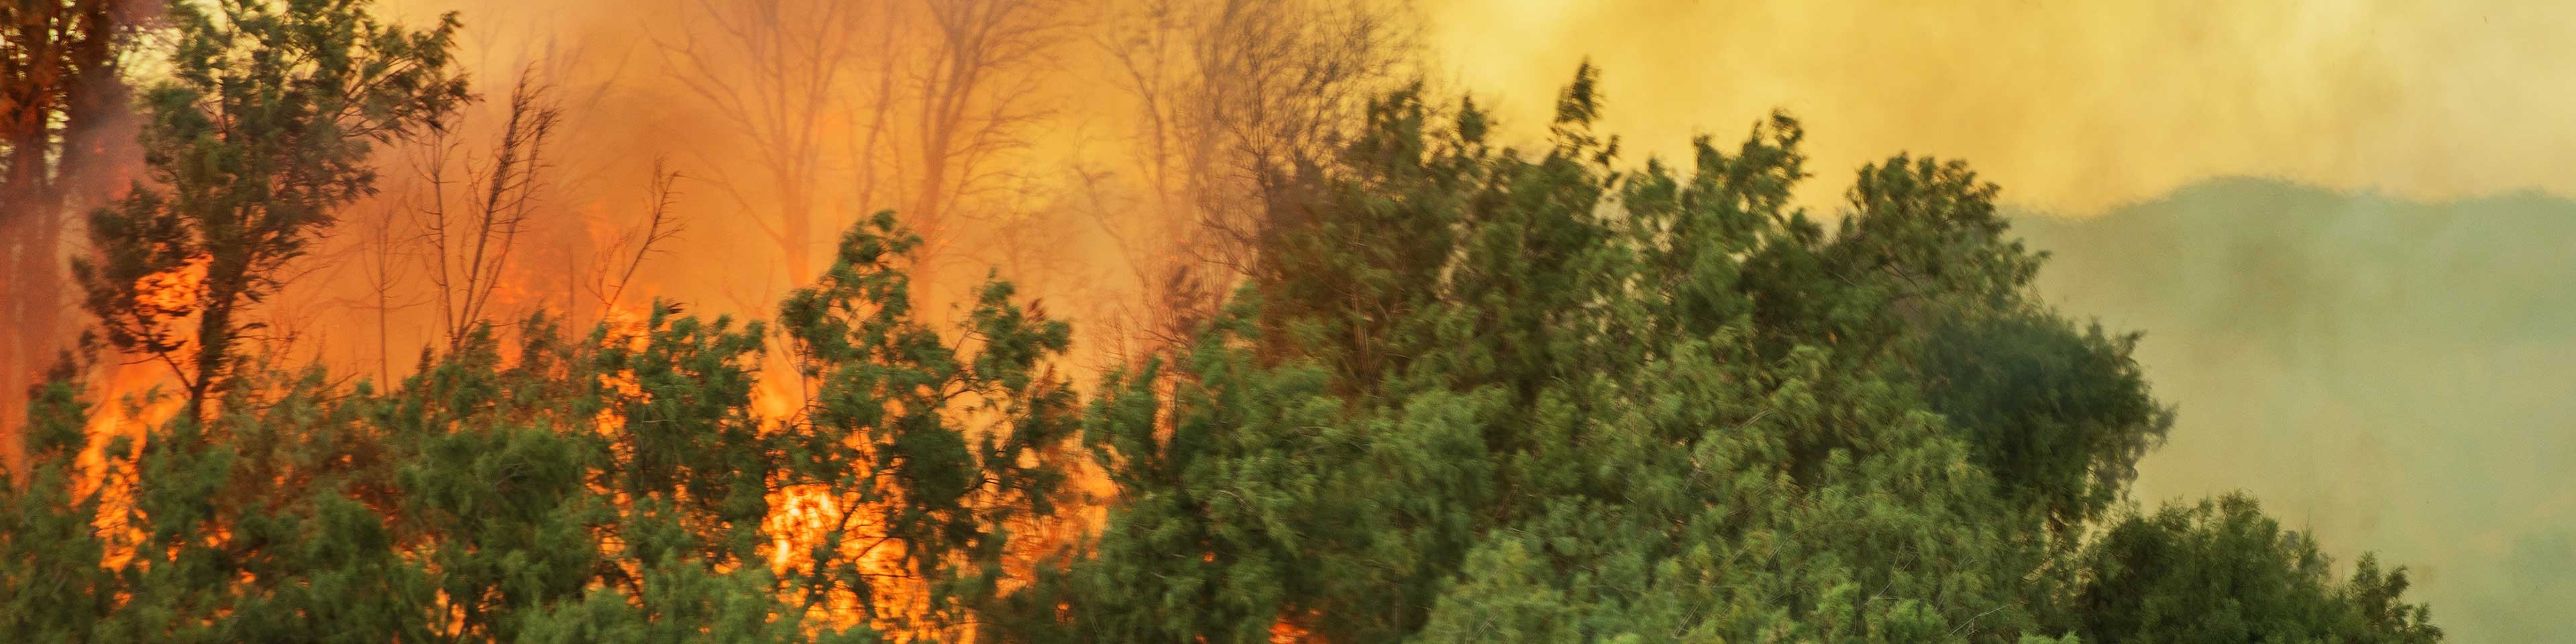 Tax relief for New Mexico victims of wildfires and straight-line winds